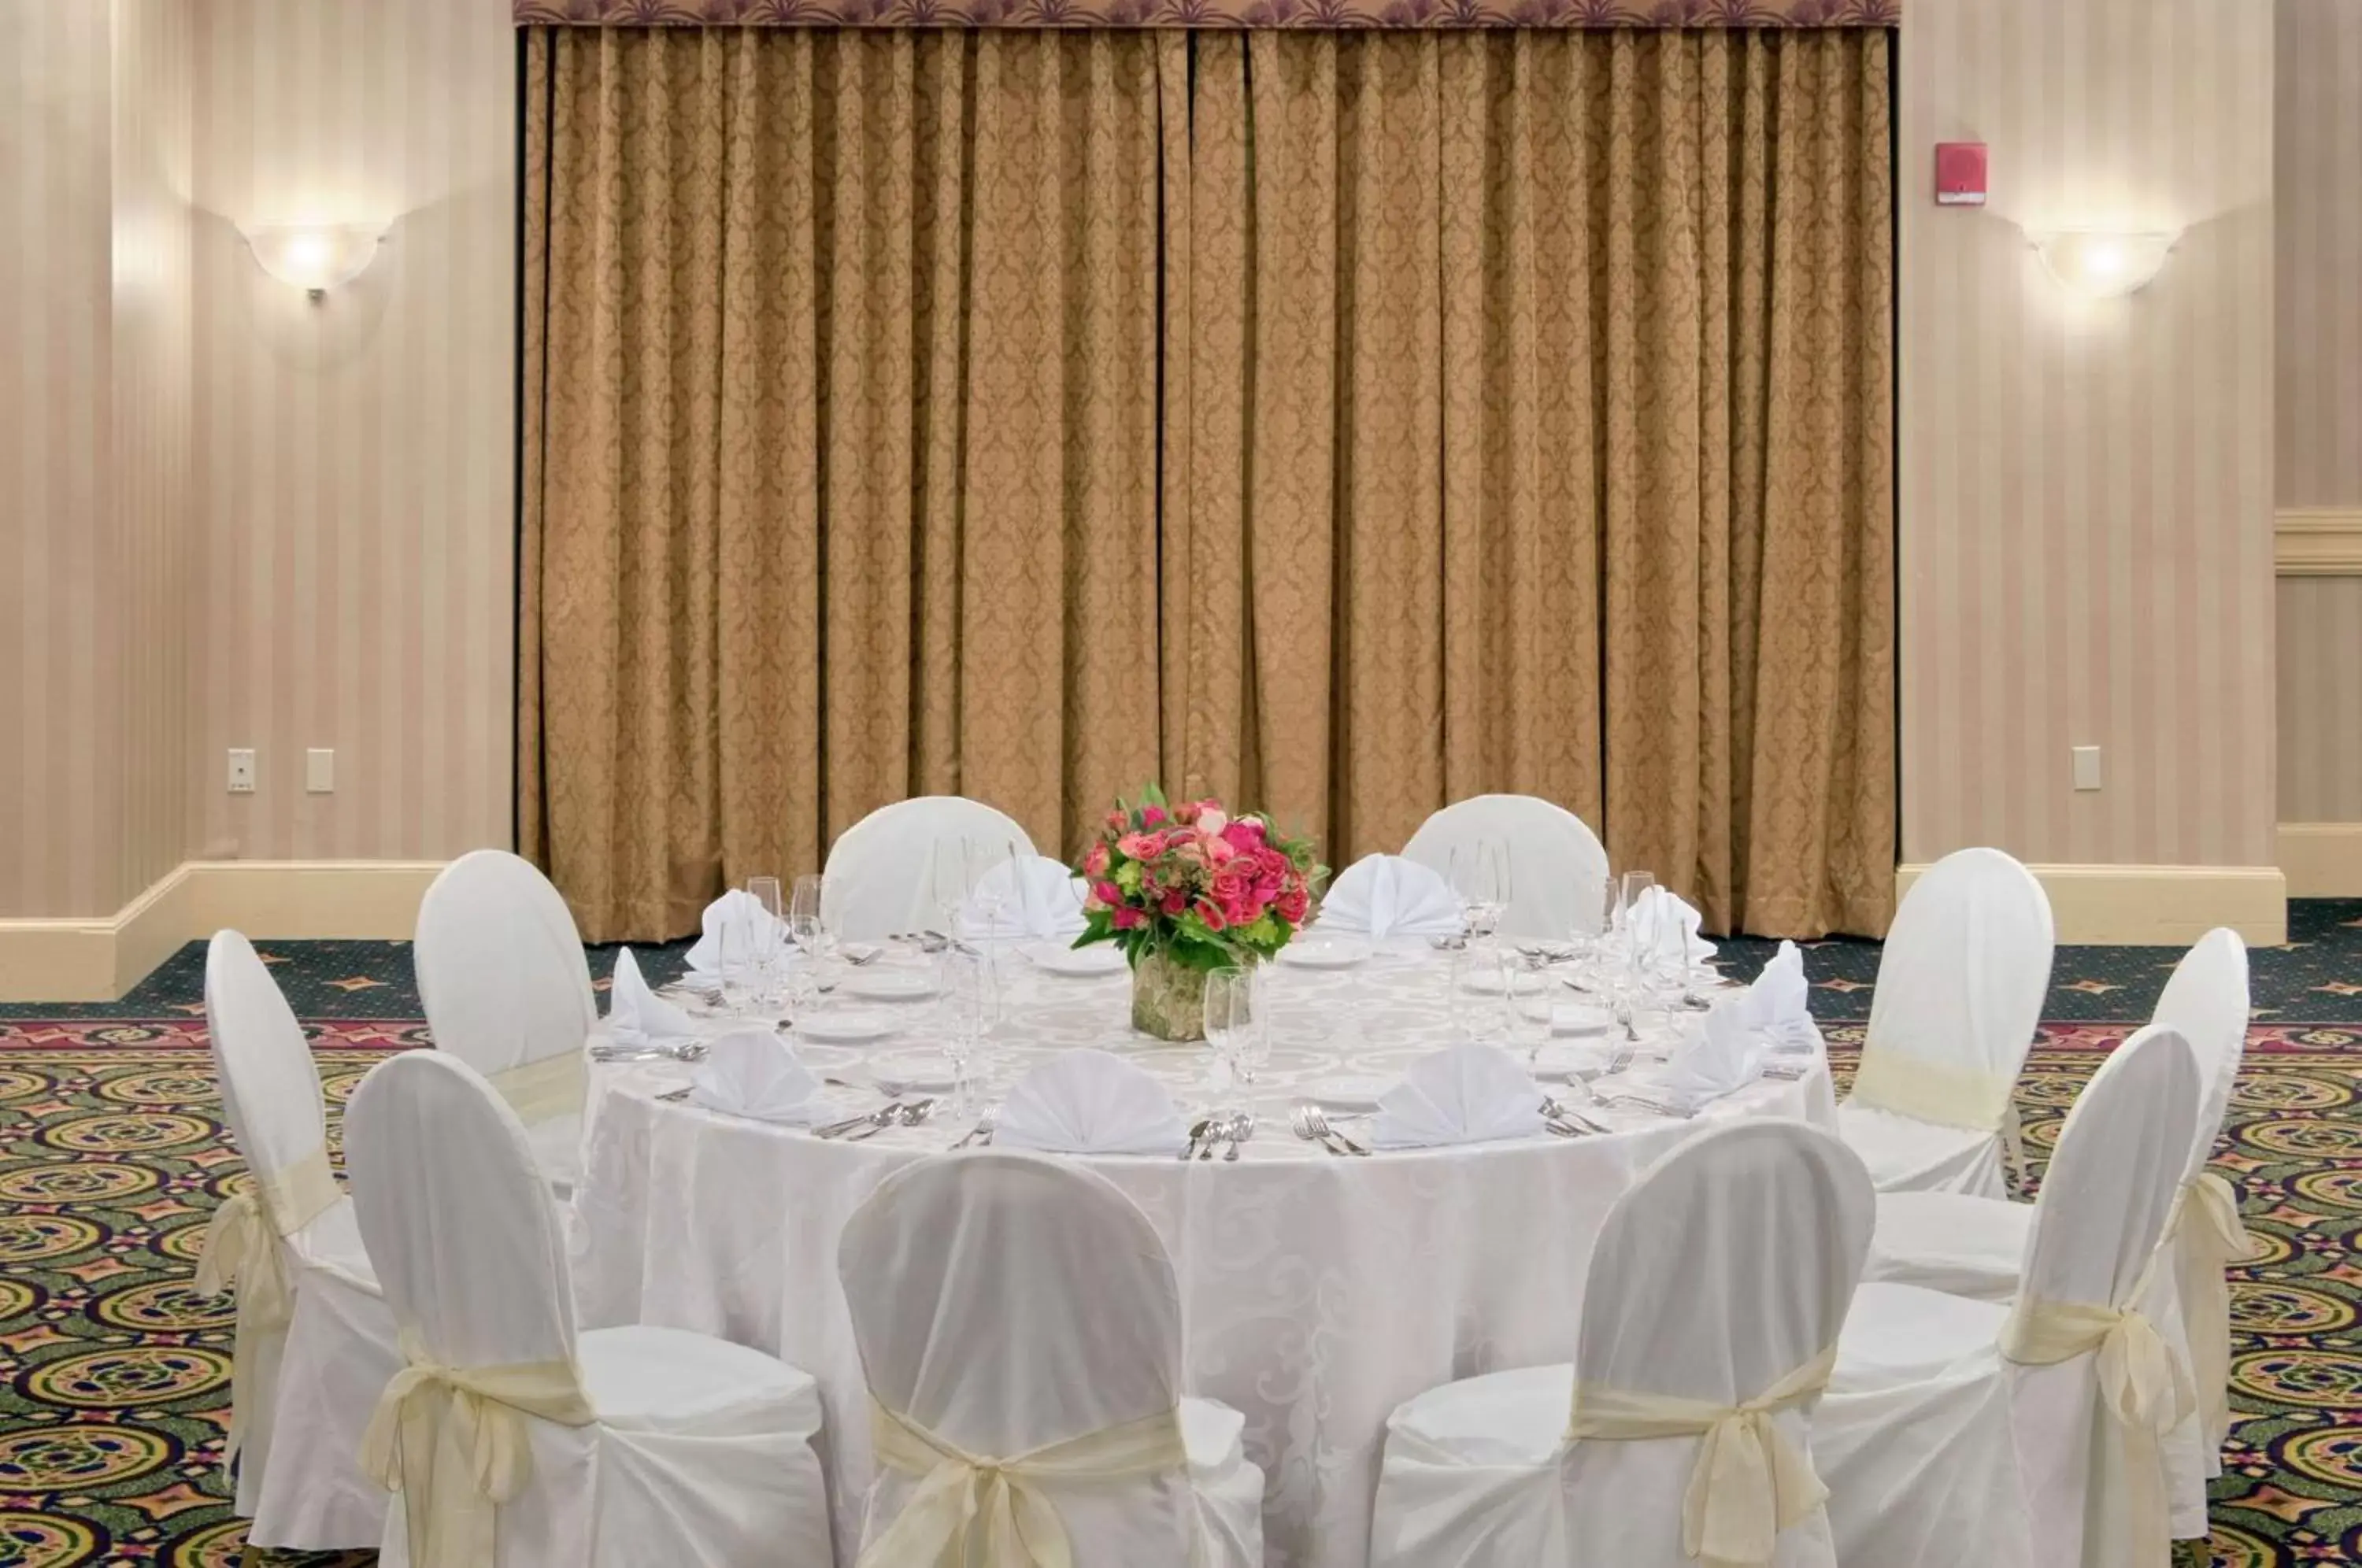 Meeting/conference room, Banquet Facilities in Hilton Providence